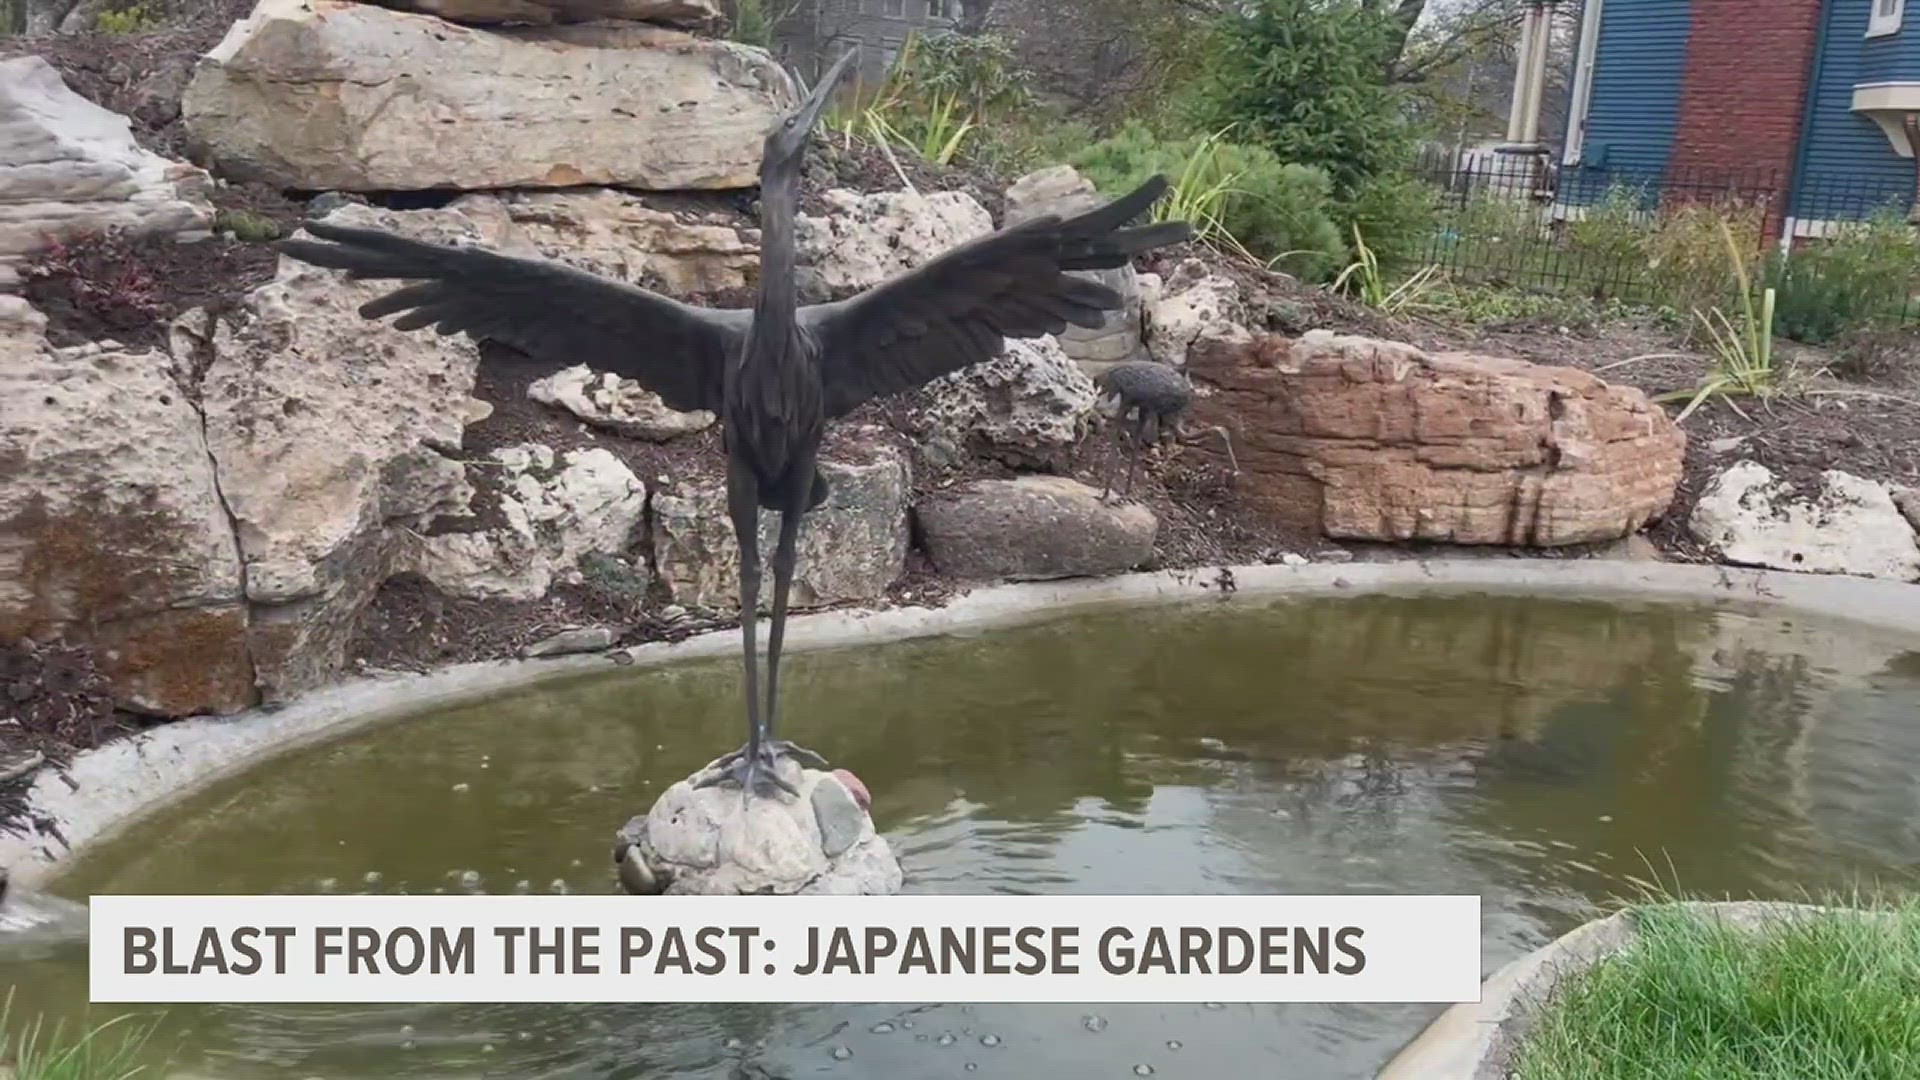 Originally built in 1930, the Muscatine Japanese Garden has not only been restored to its original glory, it's now more accessible for all visitors.